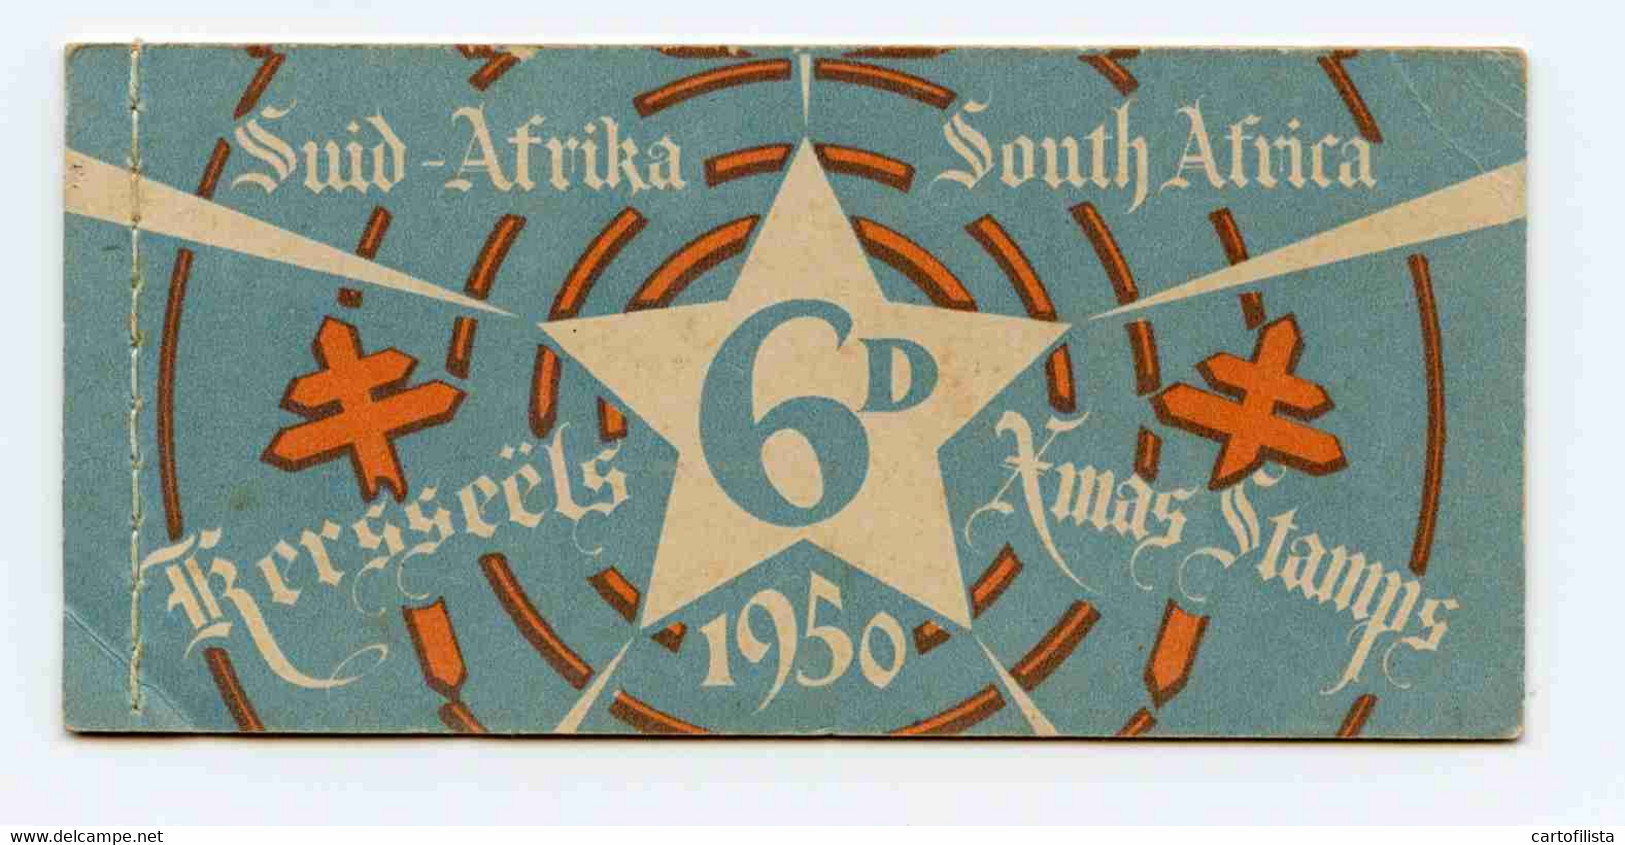 Unused Stamps, South Africa  (Lot 164) - 4 Scans - Blocs-feuillets